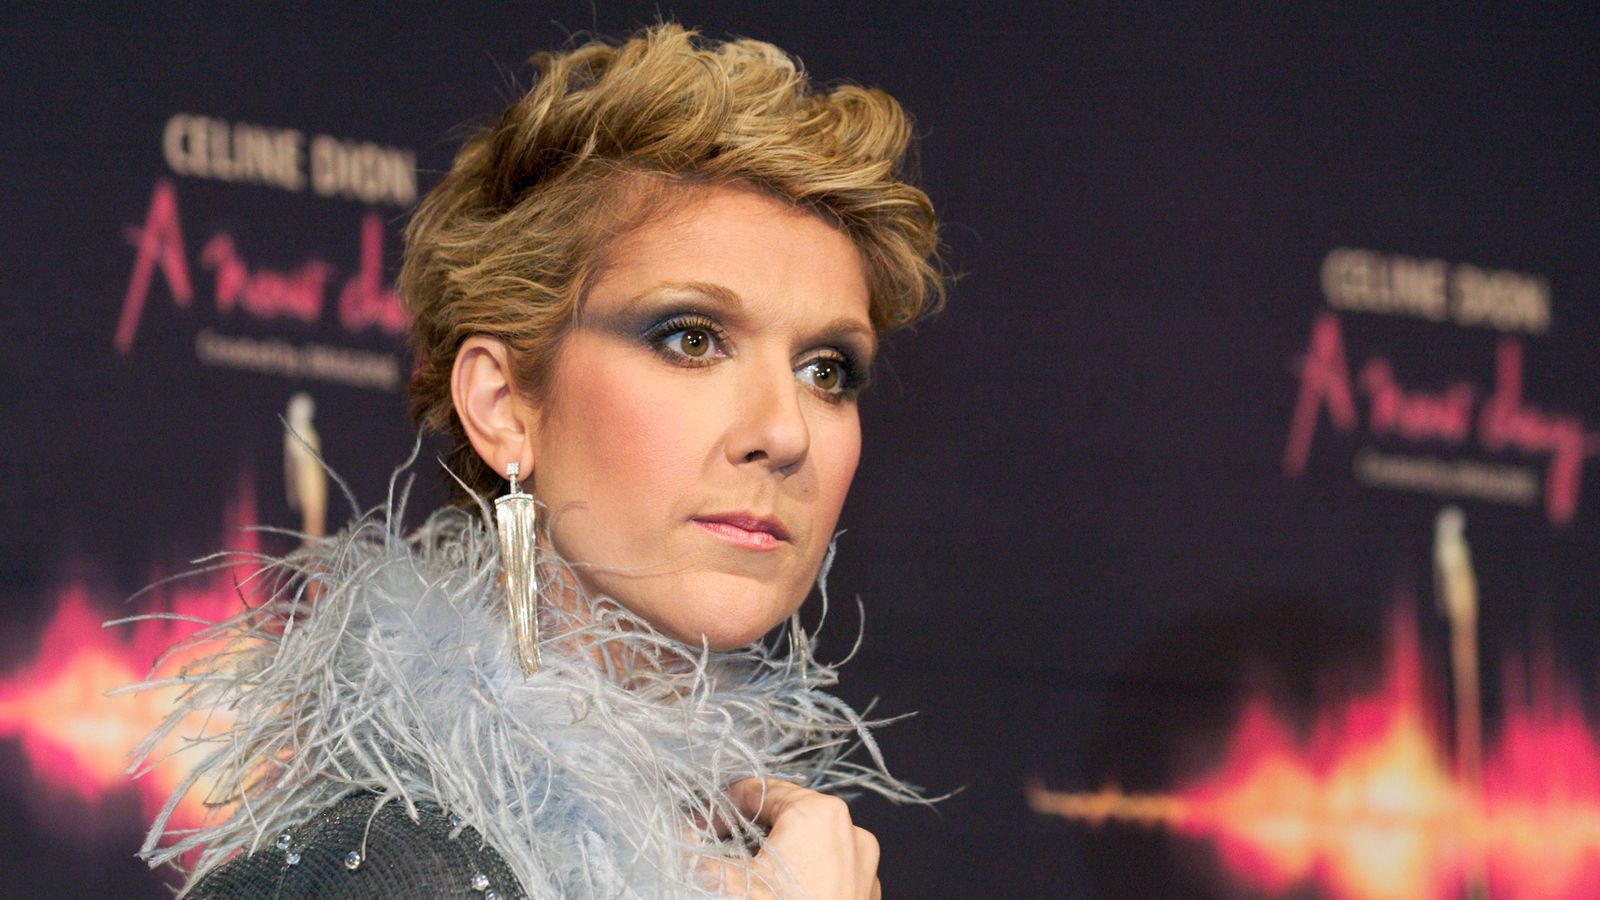 Celine Dion 'no longer has control of her muscles' due to rare illness, her sister says